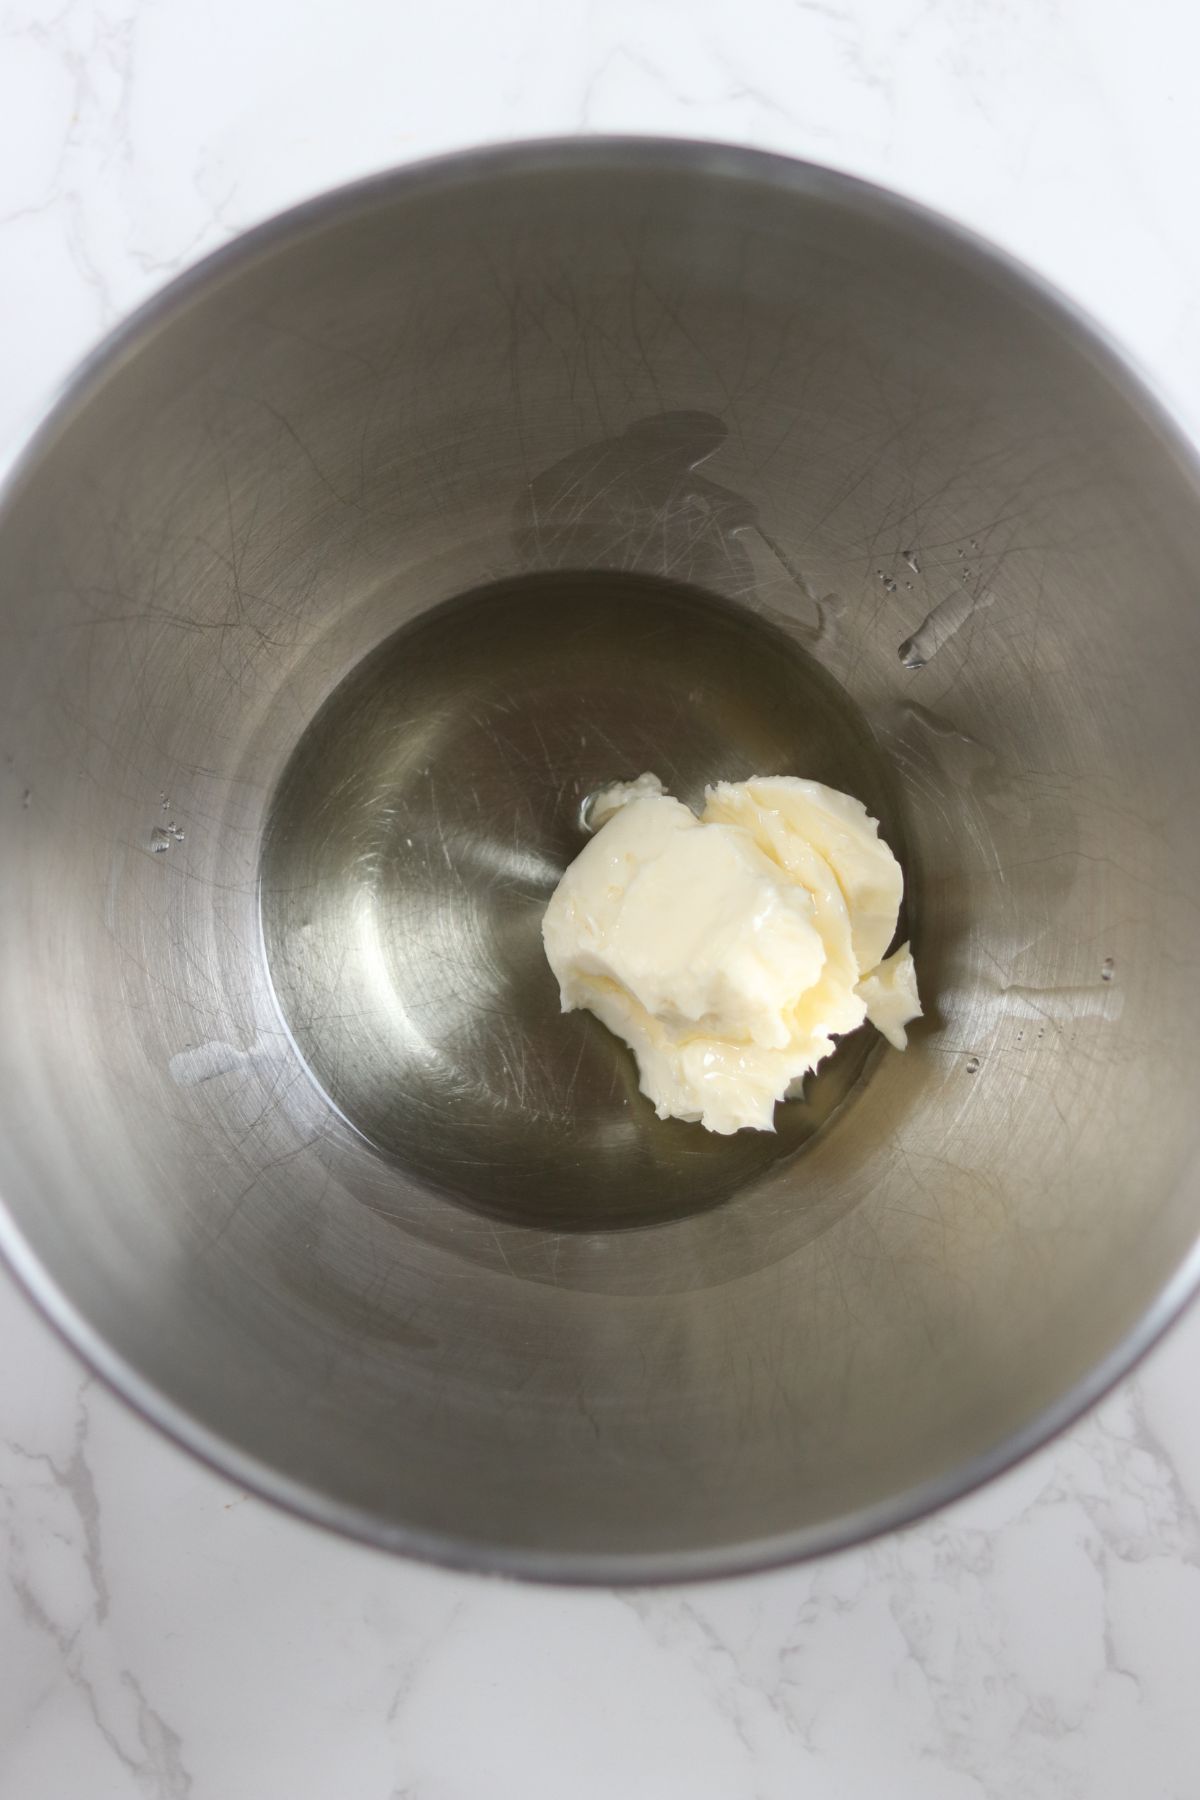 oil and butter in a bowl